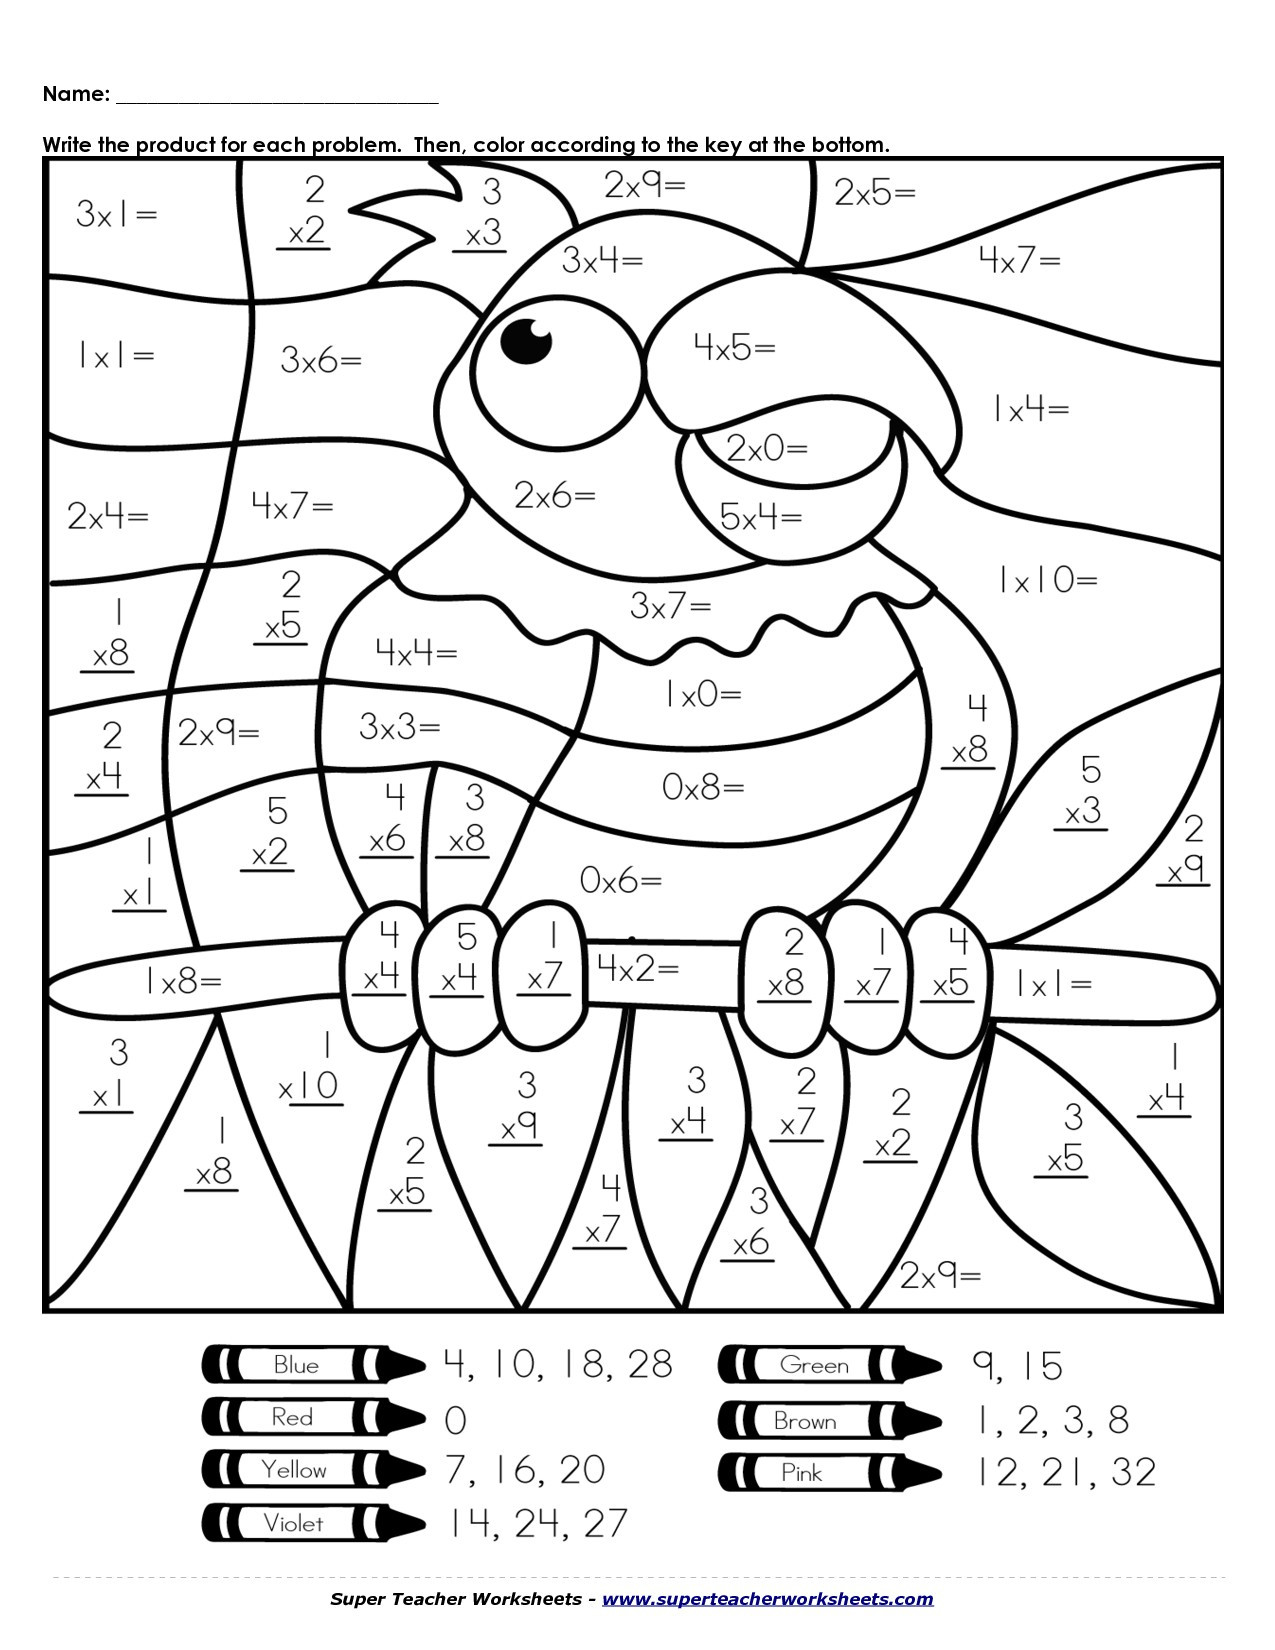 Coloring Pages For 7th Graders at GetColorings.com | Free printable